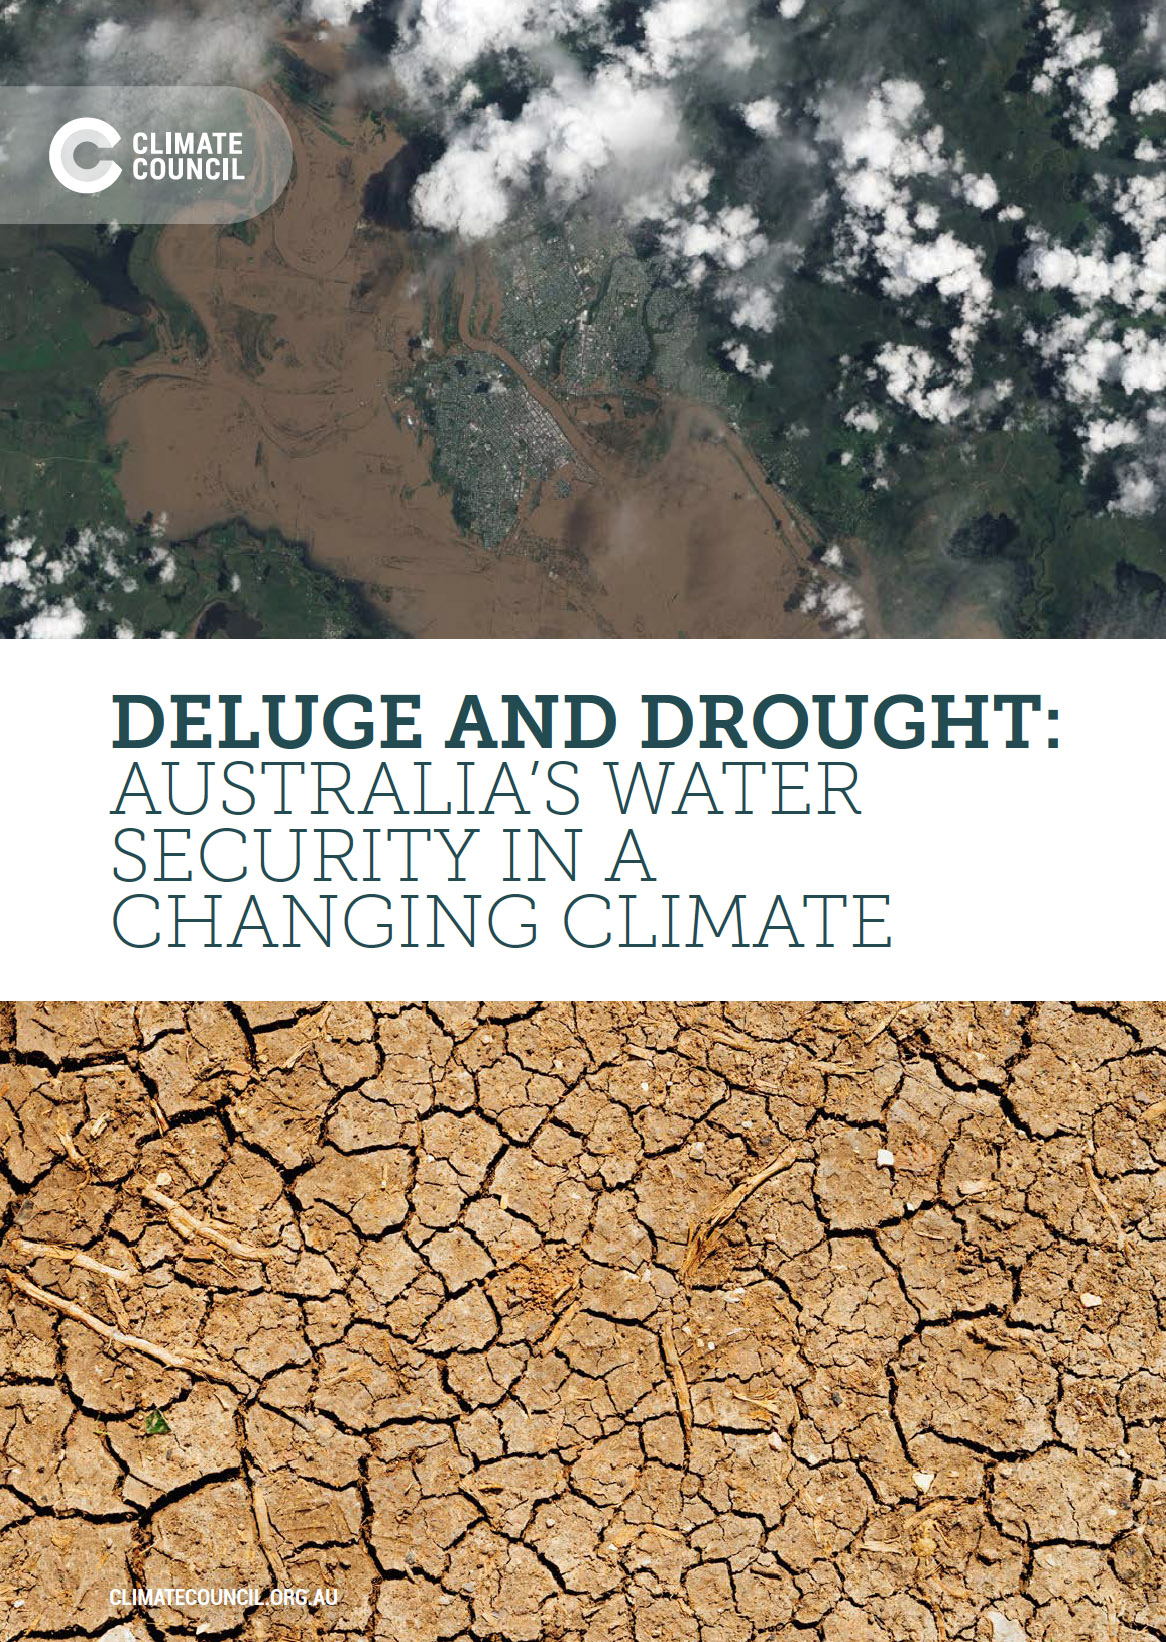 Climate Council water security repoe